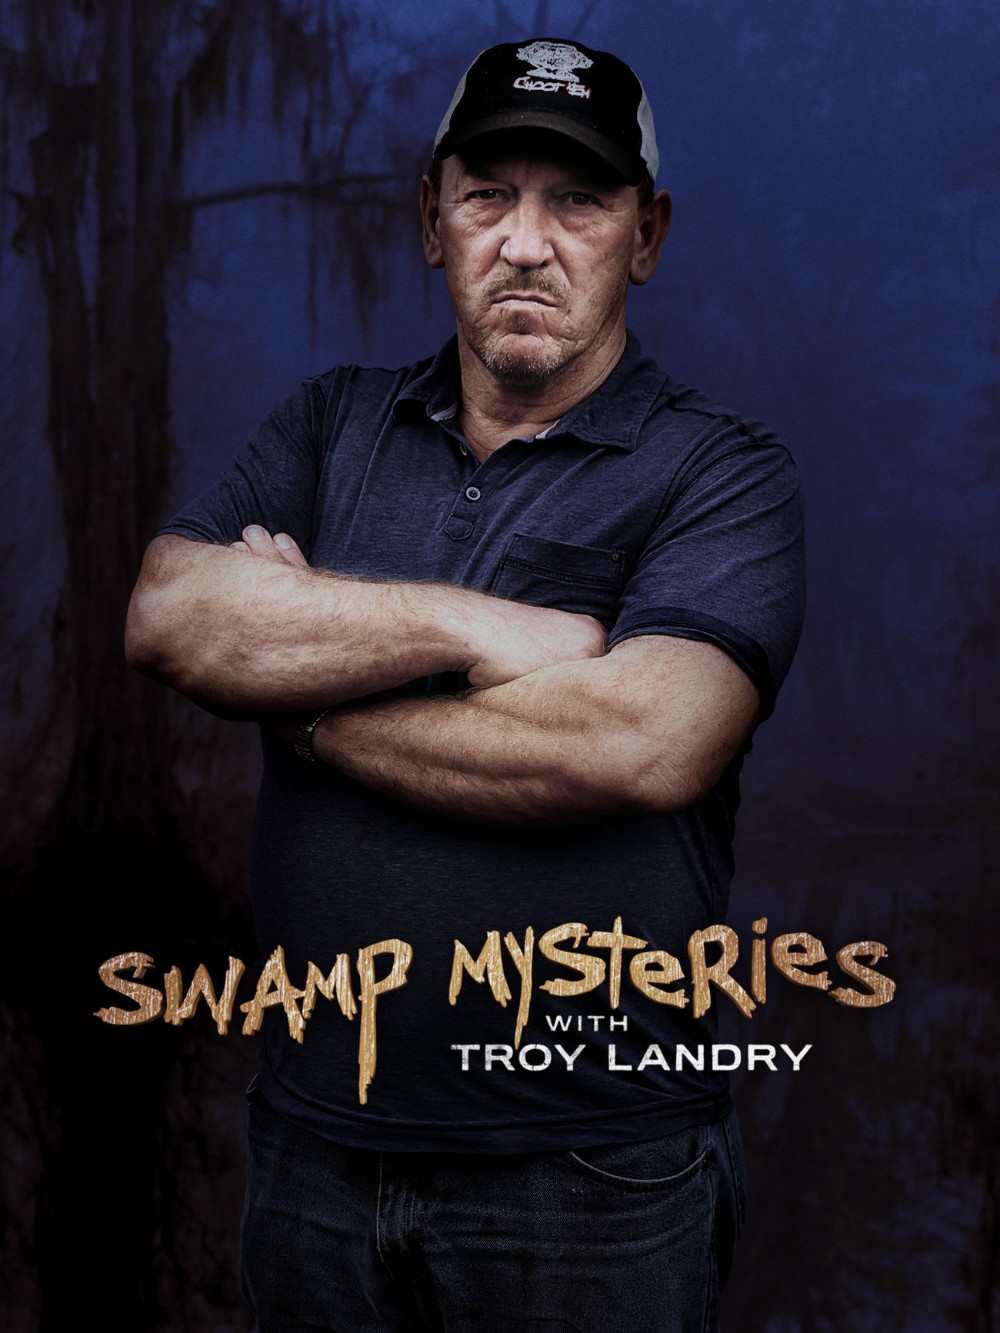 Swamp Mysteries With Troy Landry S02E03 [1080p] (x265) 52f74c6e49a89ec36355bfb0246f0059